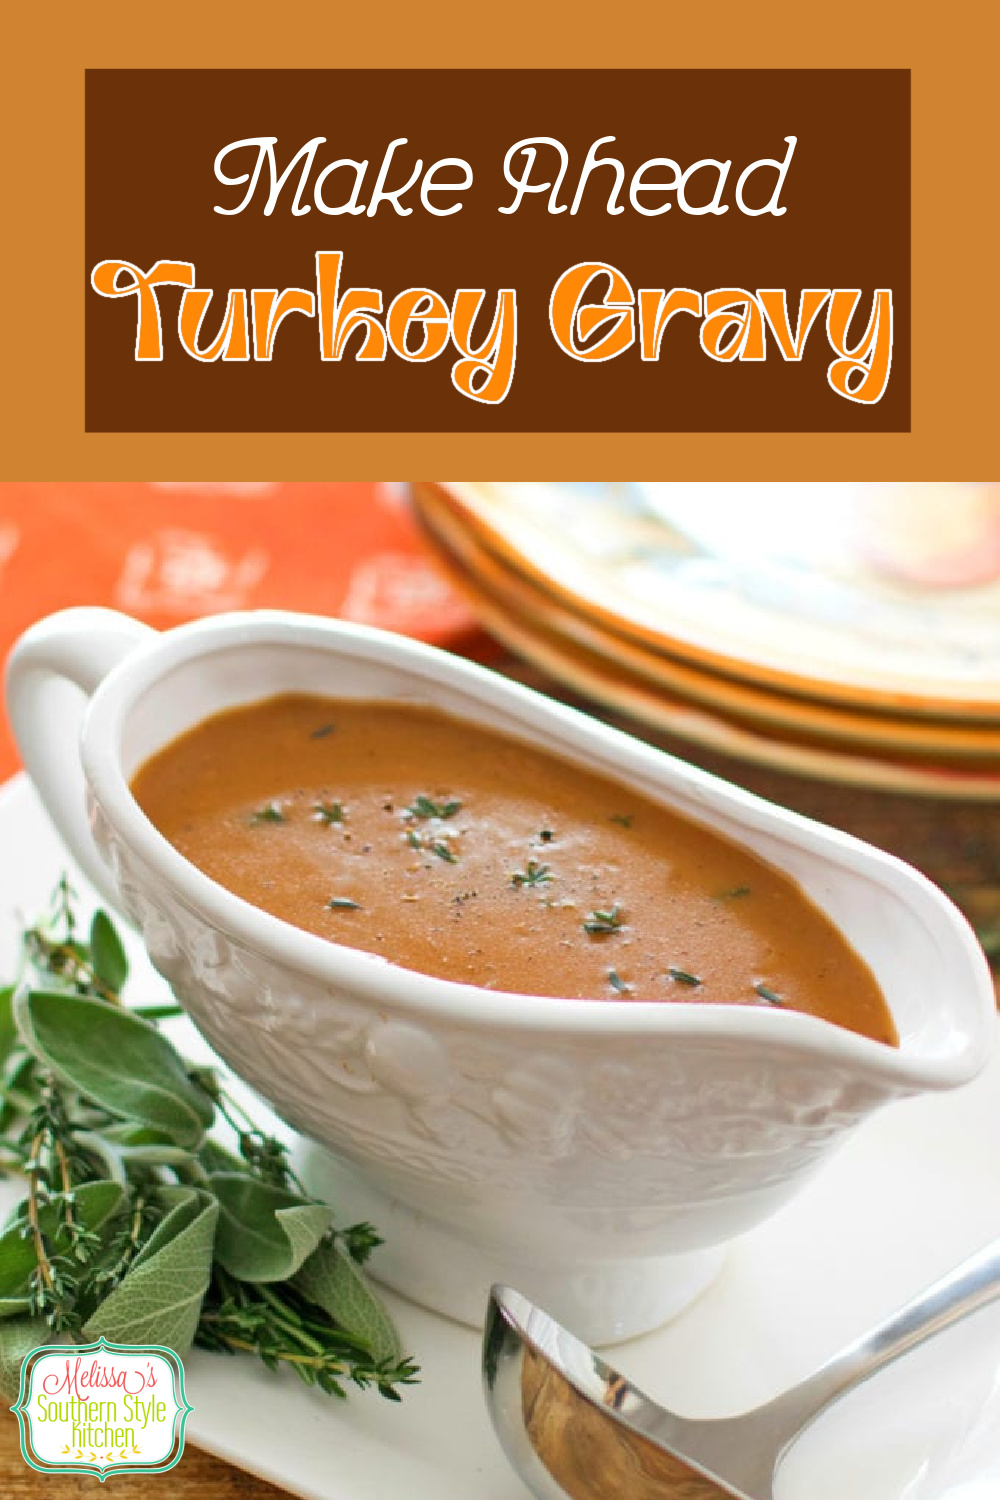 Take the stress out of Thanksgiving and make this spectacular Turkey Gravy in advance #turkeygravy #turkey #gravy #makeaheadgravy #gravyrecipes #turkey #turkeyrecipes #thanksgivingrecipes #thanksgiving #fall #fallrecipes #soujthernfood #southernrecipes